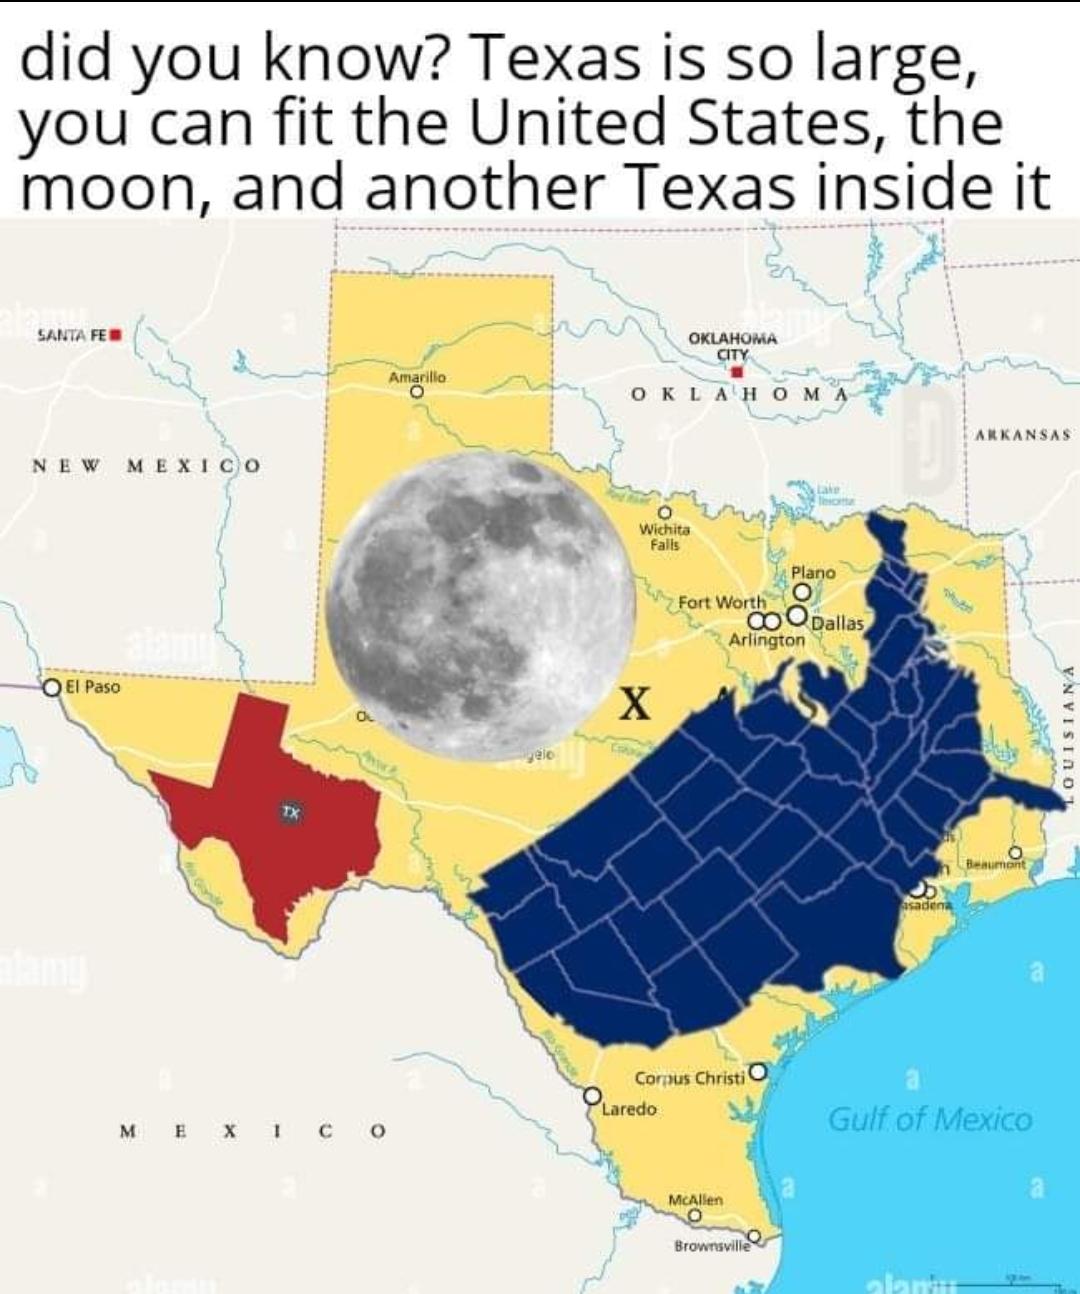 daily dose of memes - Funny meme - did you know? Texas is so large, you can fit the United States, the moon, and another Texas inside it Santa Fe New Mexico O El Paso Mexico Amarillo gelo Oklahoma City Oklahoma C O Wichita Falls X Fort Worth Laredo Corpus